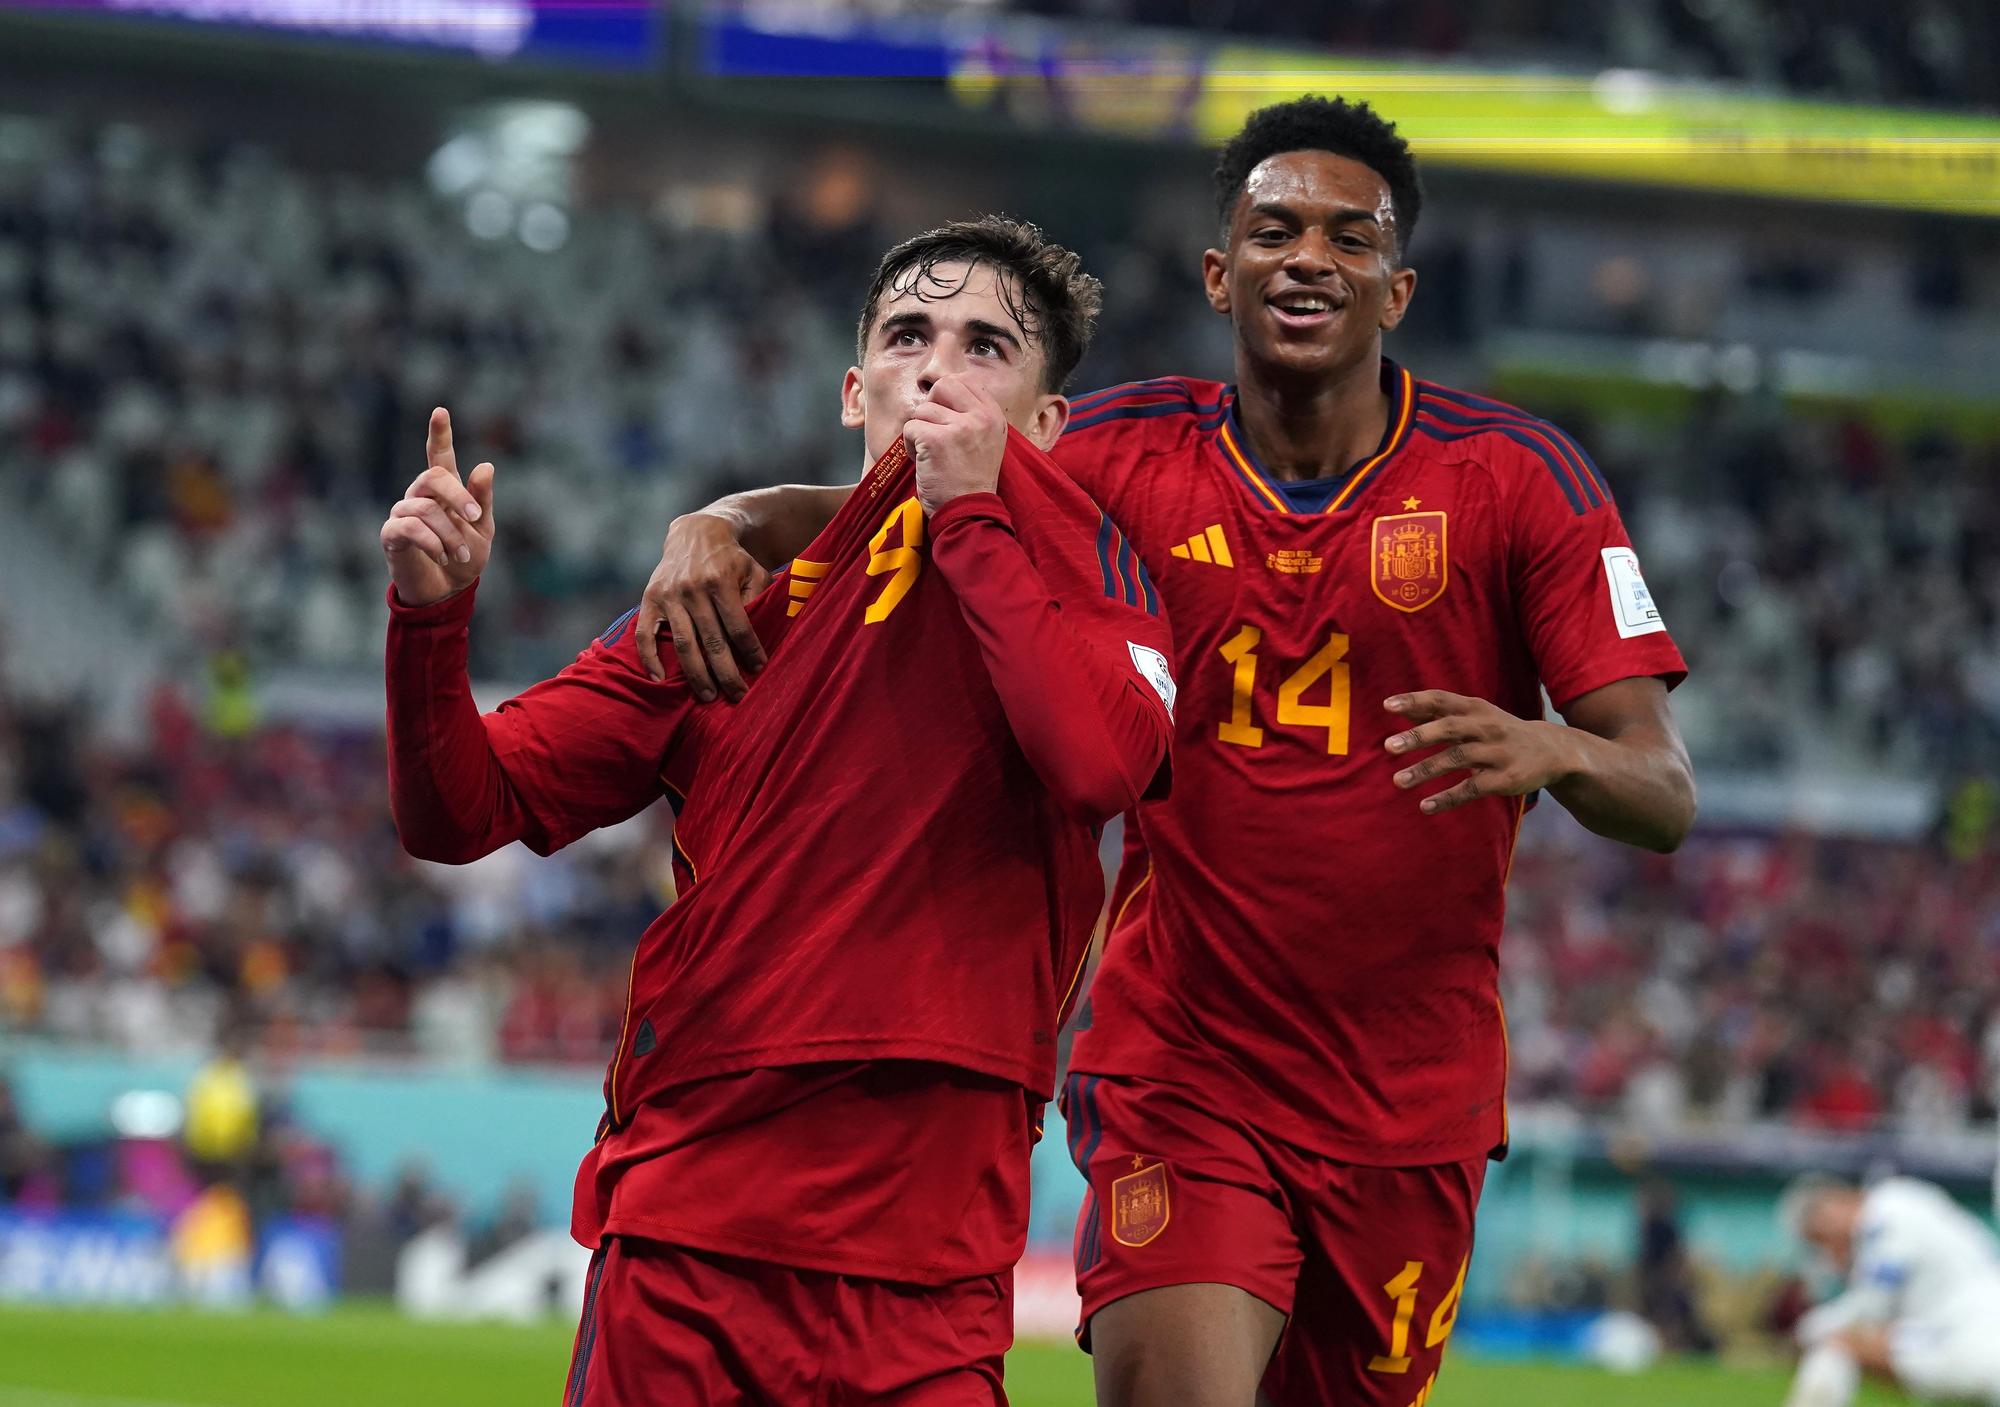 23 November 2022, Qatar, Doha: Spain's Gavi celebrates scoring his side's fifth goal with team-mate Jose Gaya during during the FIFA World Cup Qatar 2022 Group E soccer match between Spain and Costa Rica at the Al Thumama Stadium. Photo: Adam Davy/PA Wire